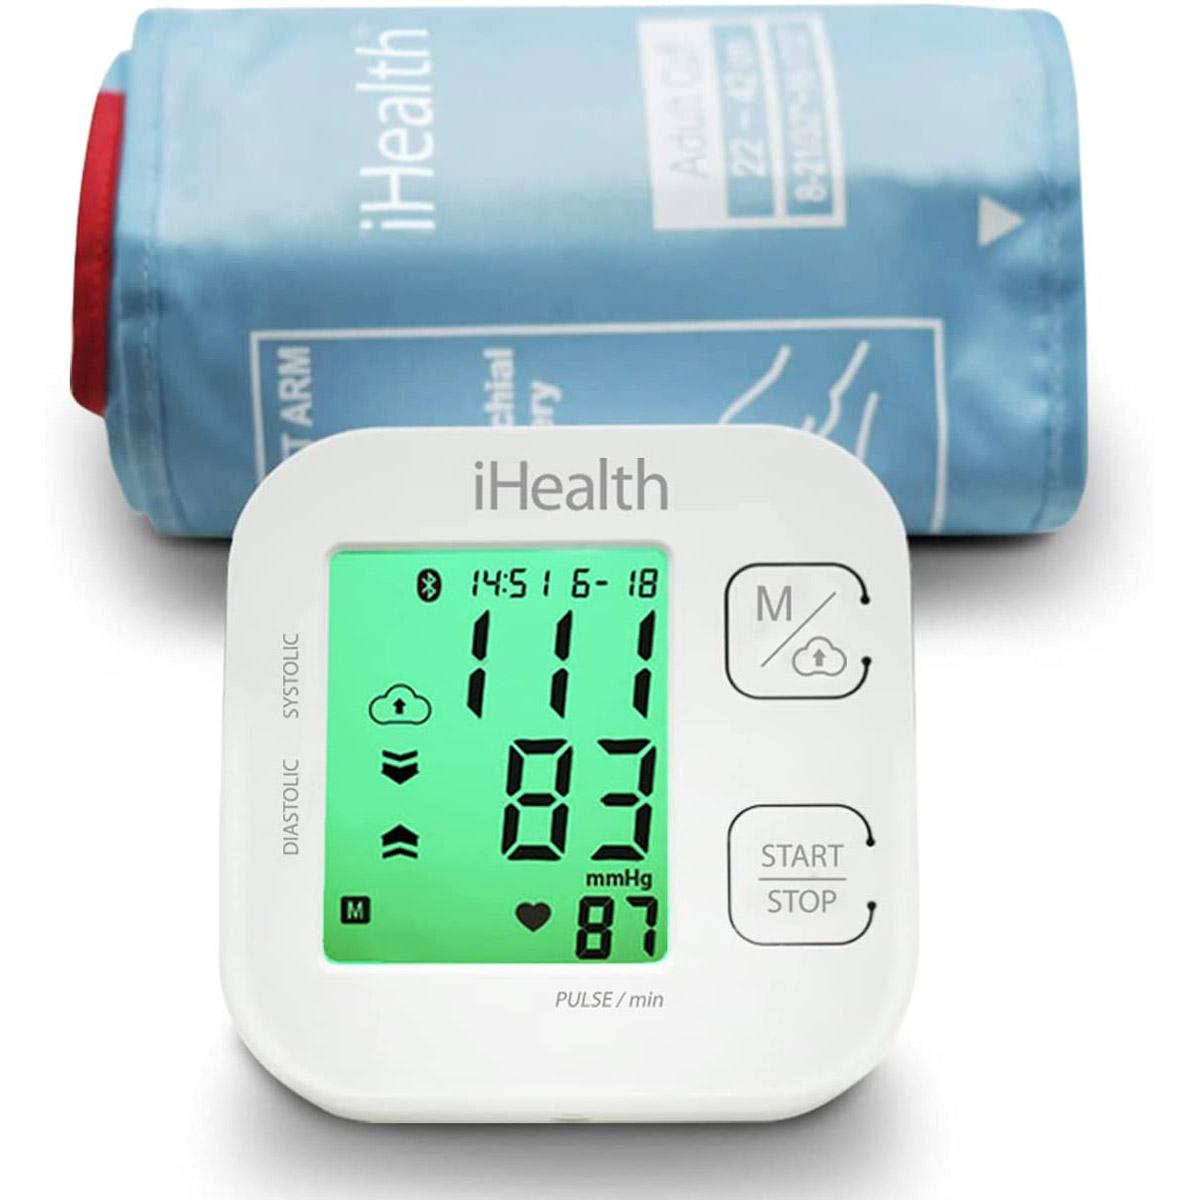 iHealth Track Smart Upper Arm Blood Pressure Monitor for $26.99 Shipped